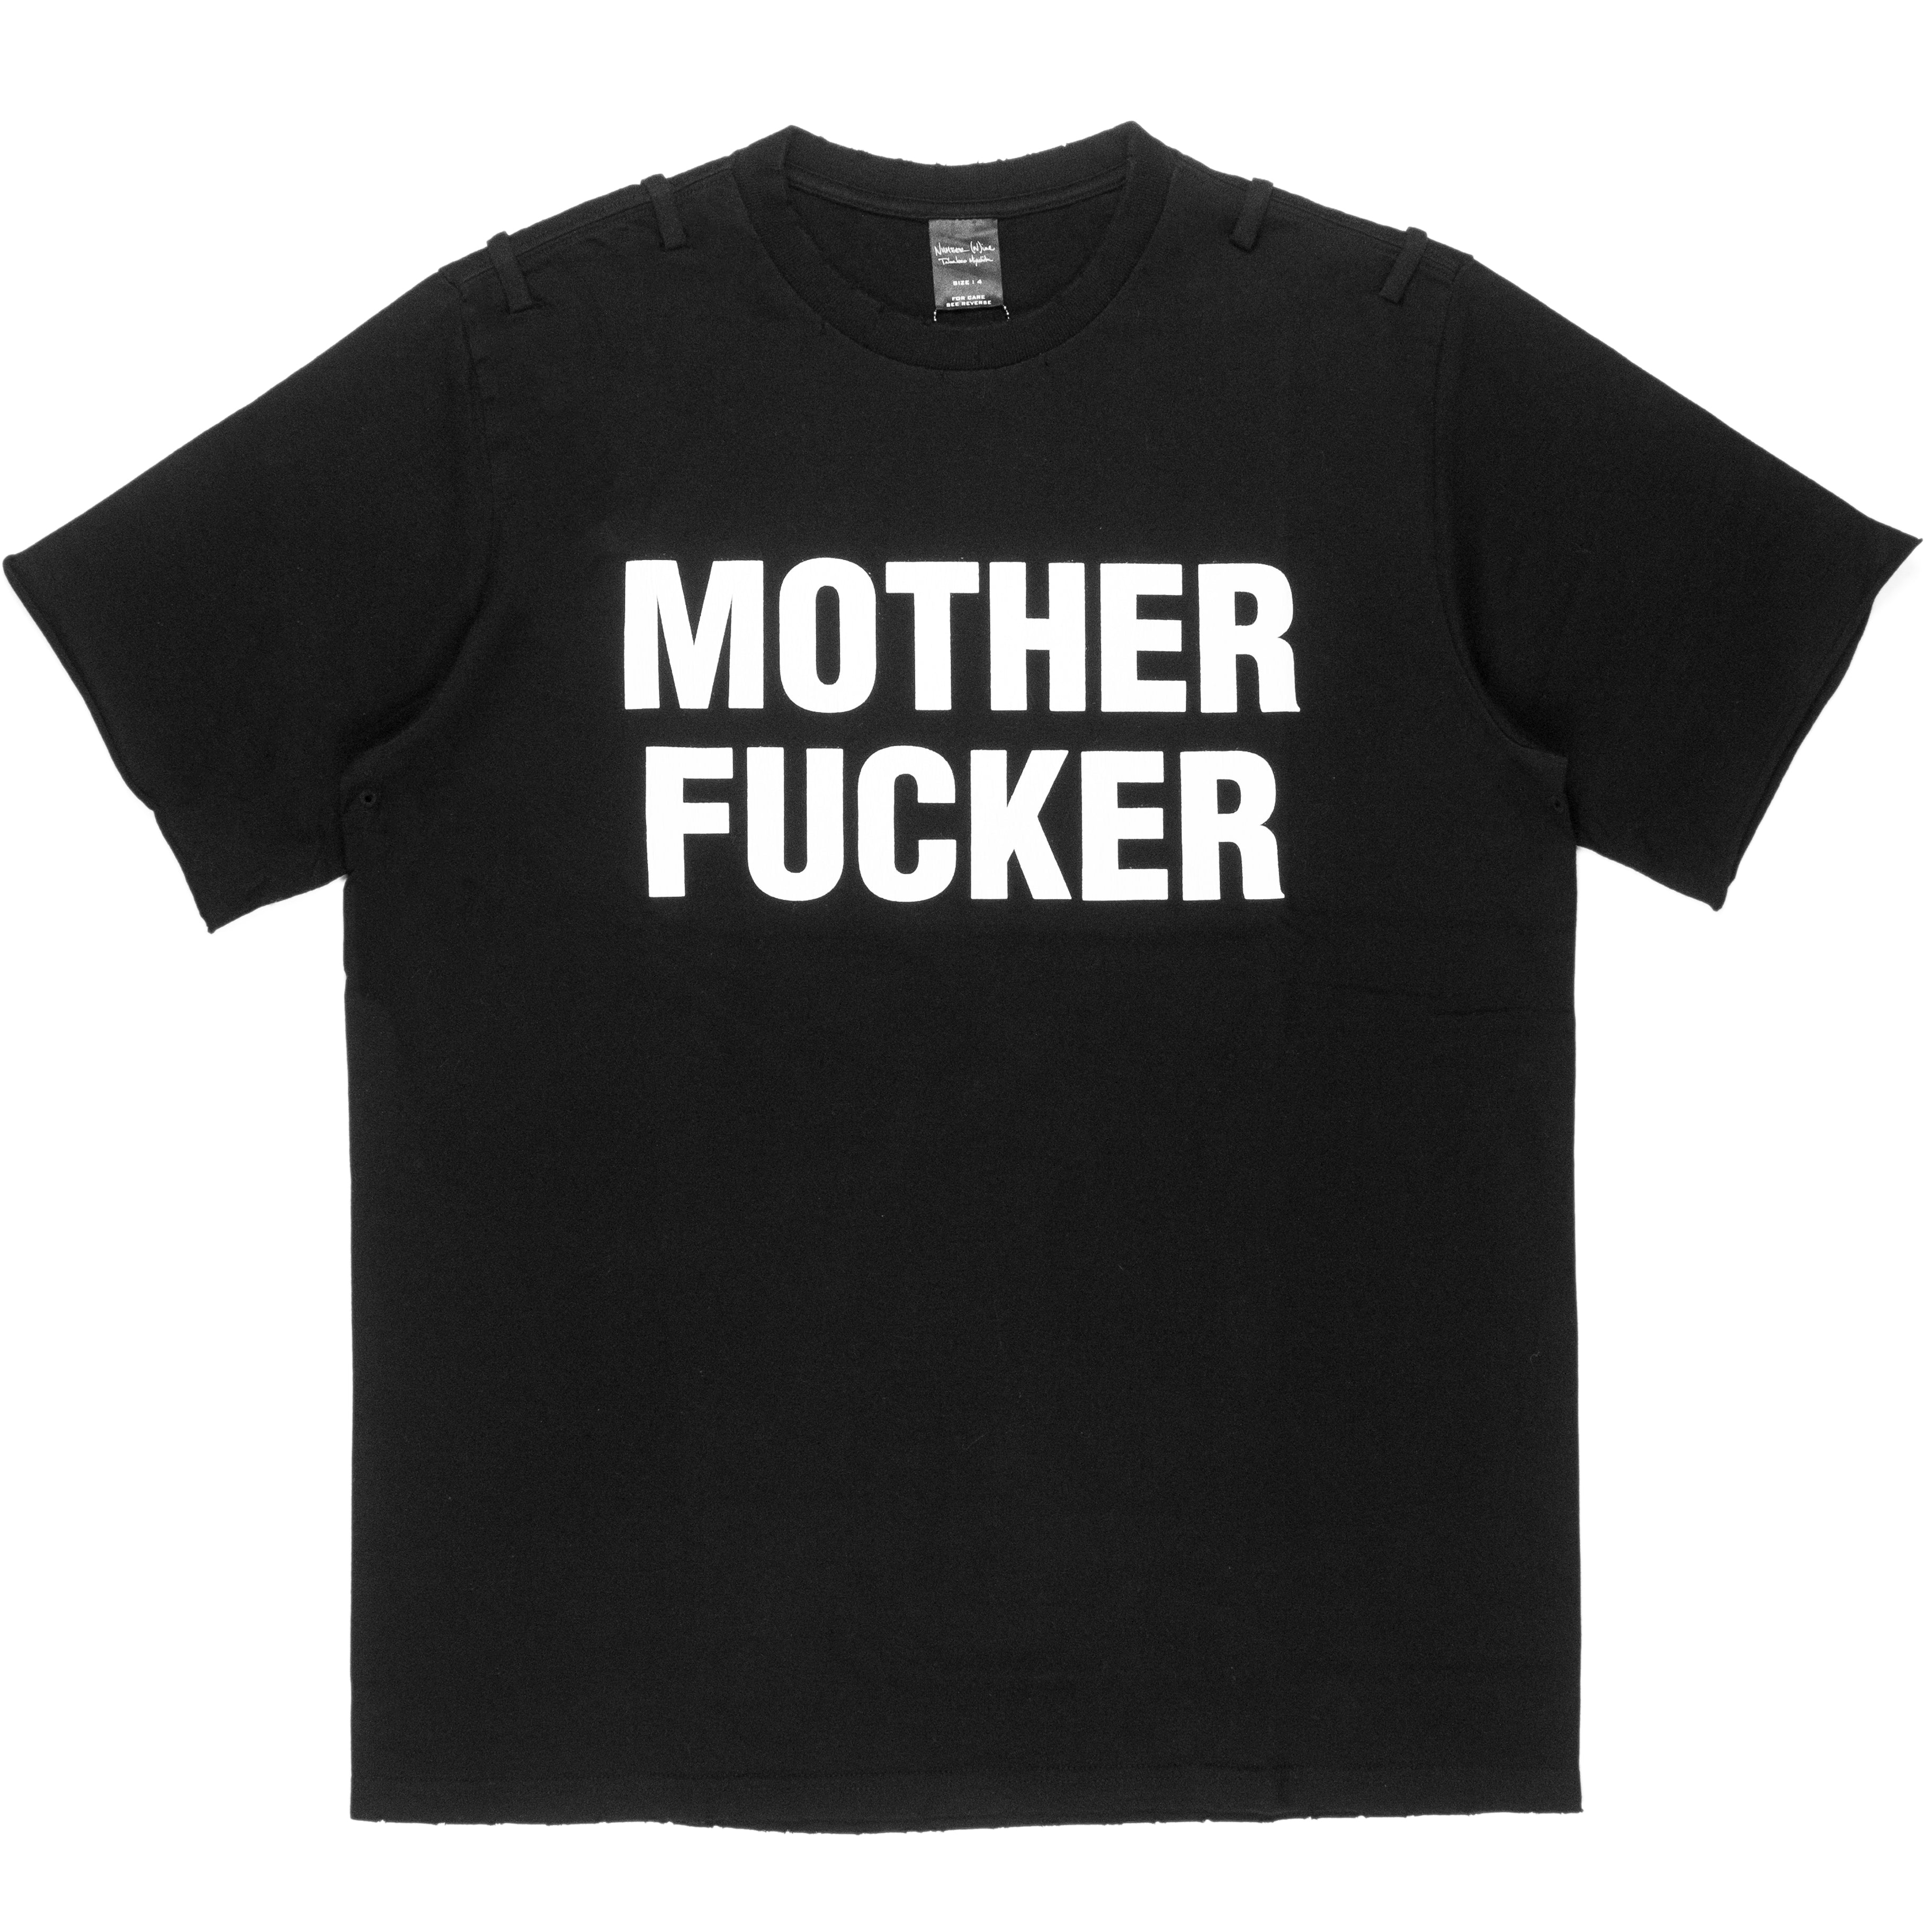 Number (N)ine “Motherfucker” Tee - SS06 “Welcome To The Shadow